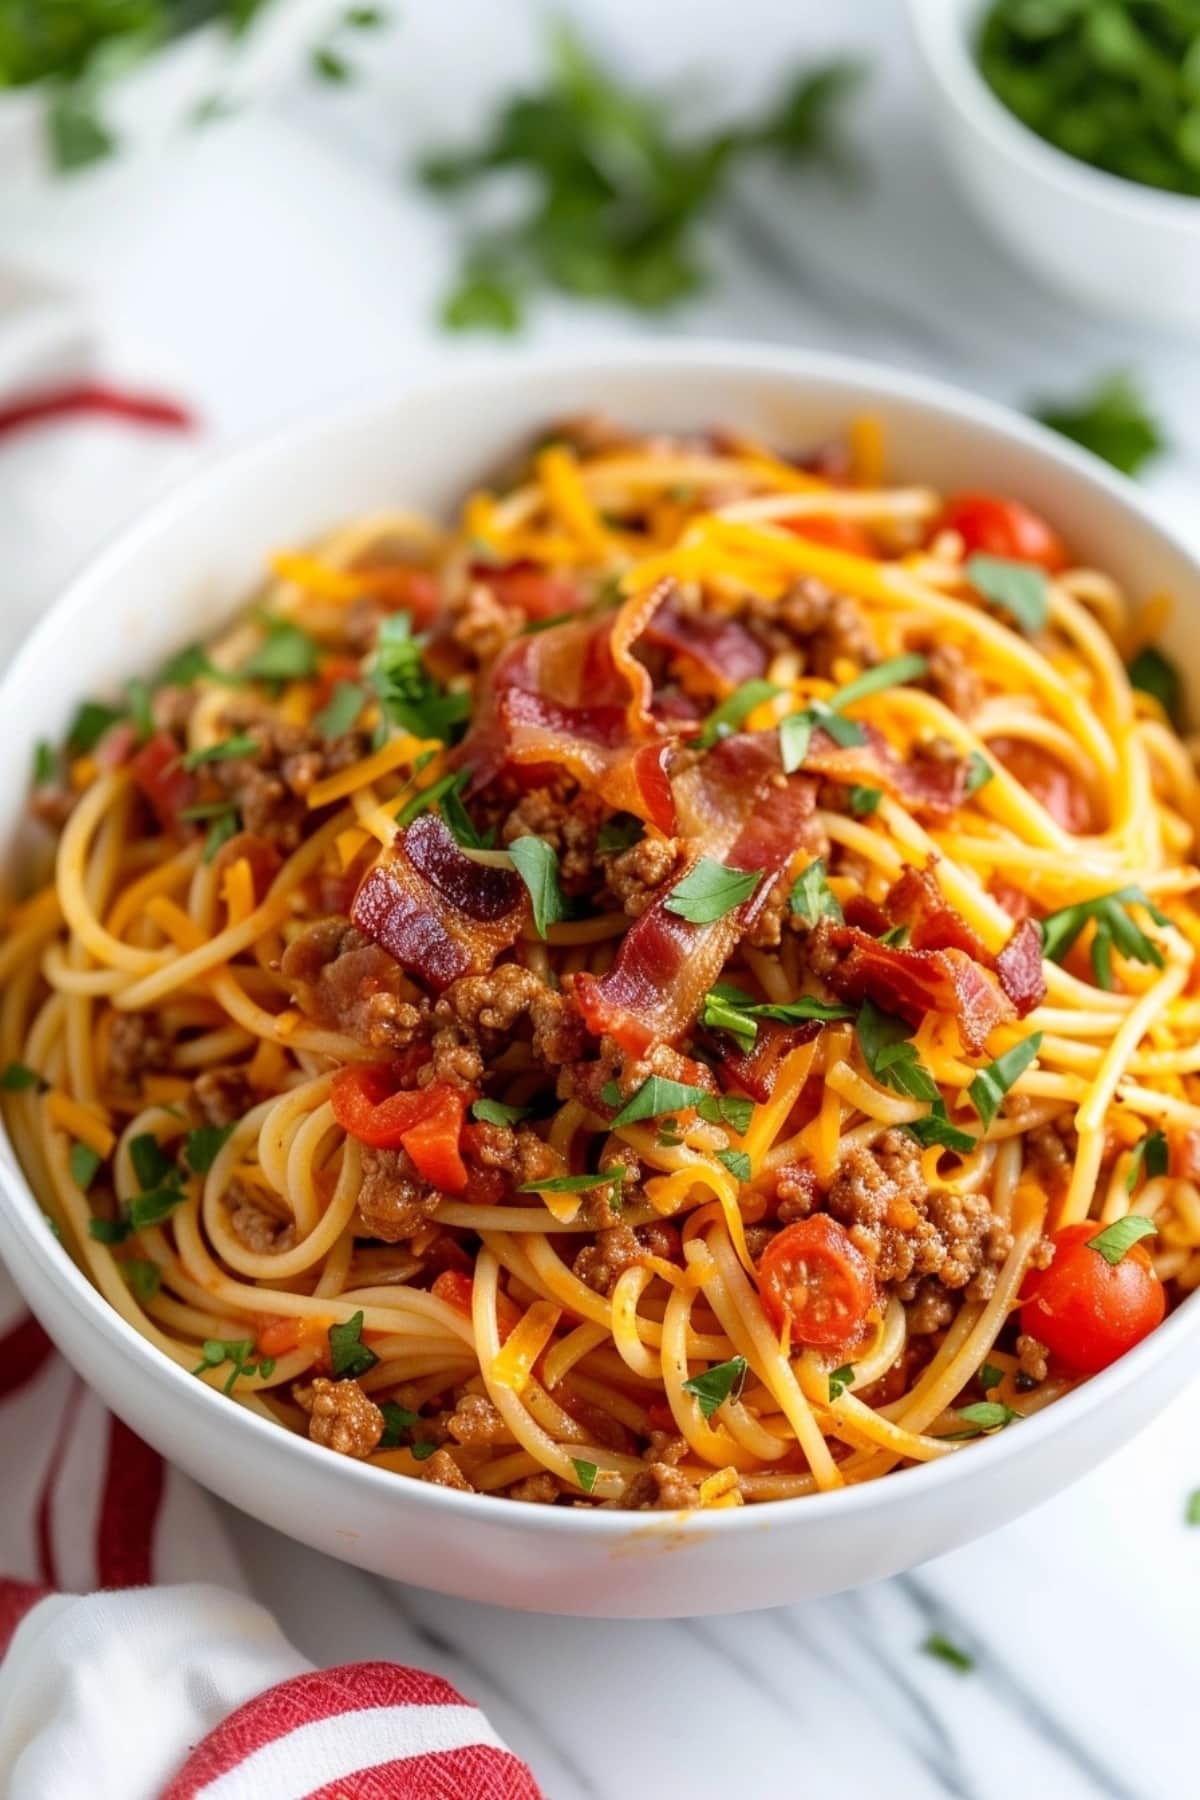 Cowboy spaghetti in a bowl topped with chopped parsley and crispy bacon.